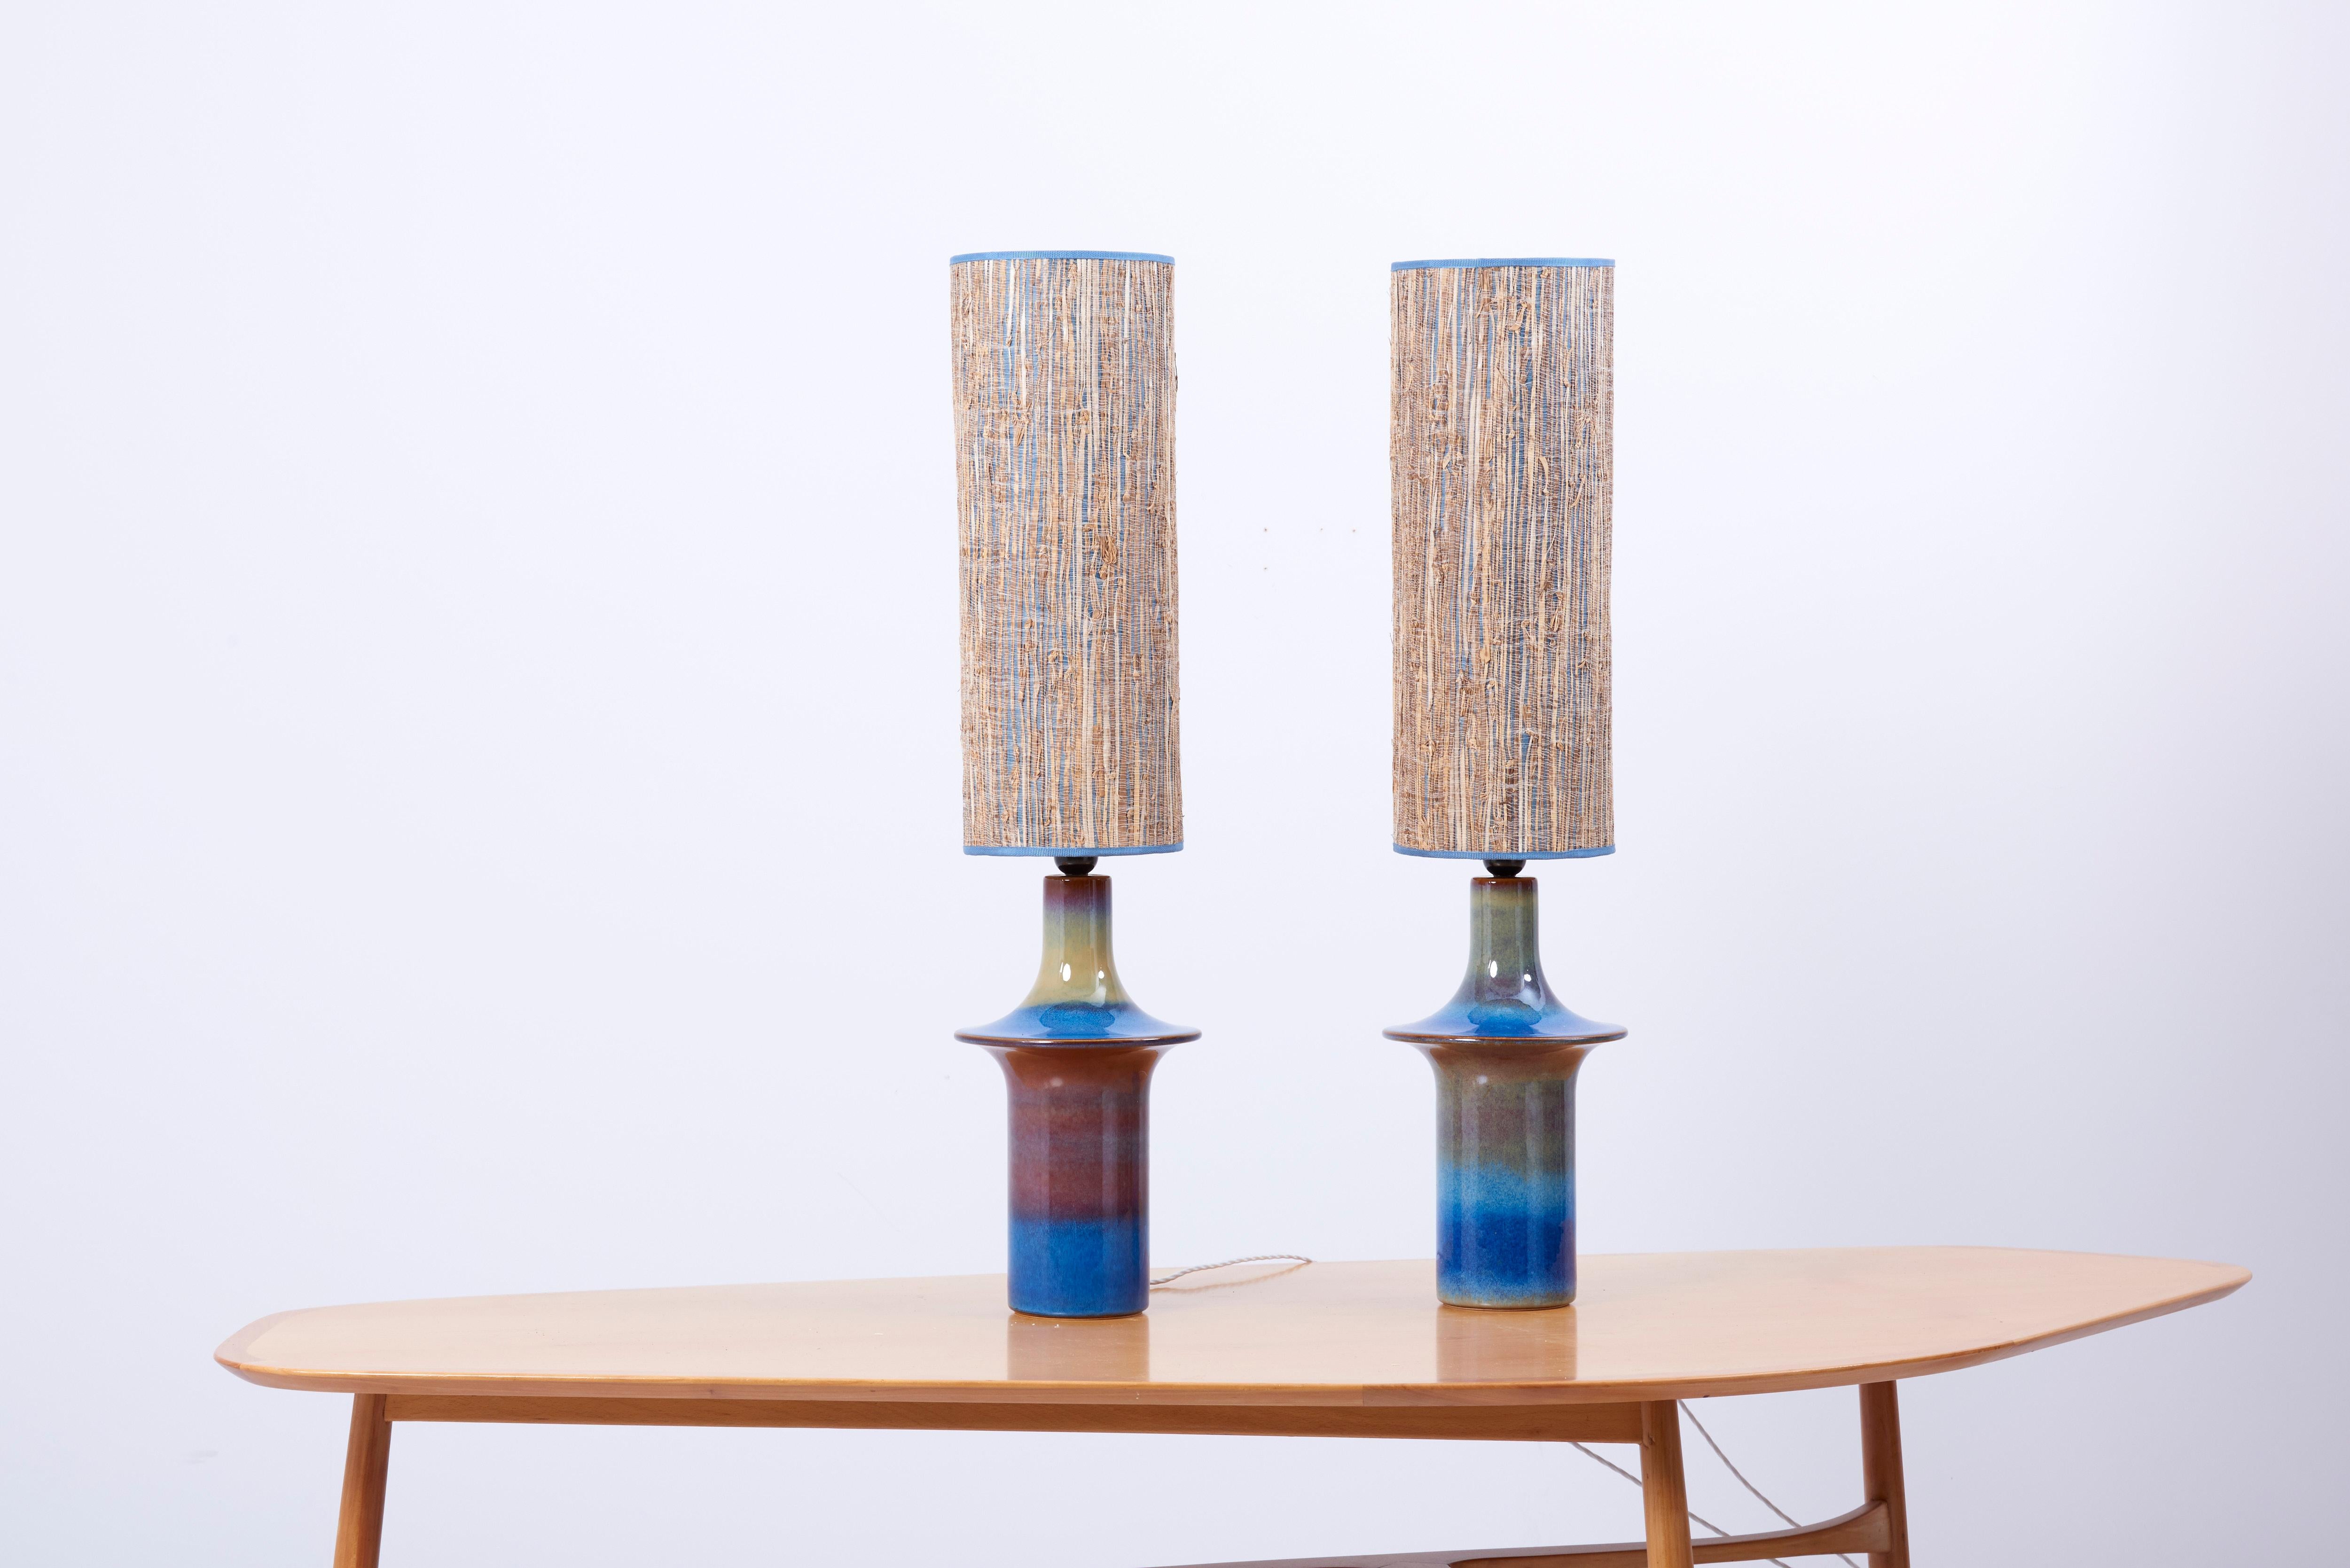 A pair of blue ceramic table lamps by Søholm Stentøj, Denmark. Marked by Søholm and in mint condition.
Including new custom lampshades curated by the Interior Designer Harry Clark.

1 x E27 socket / each.

Please note: Lamp should be fitted